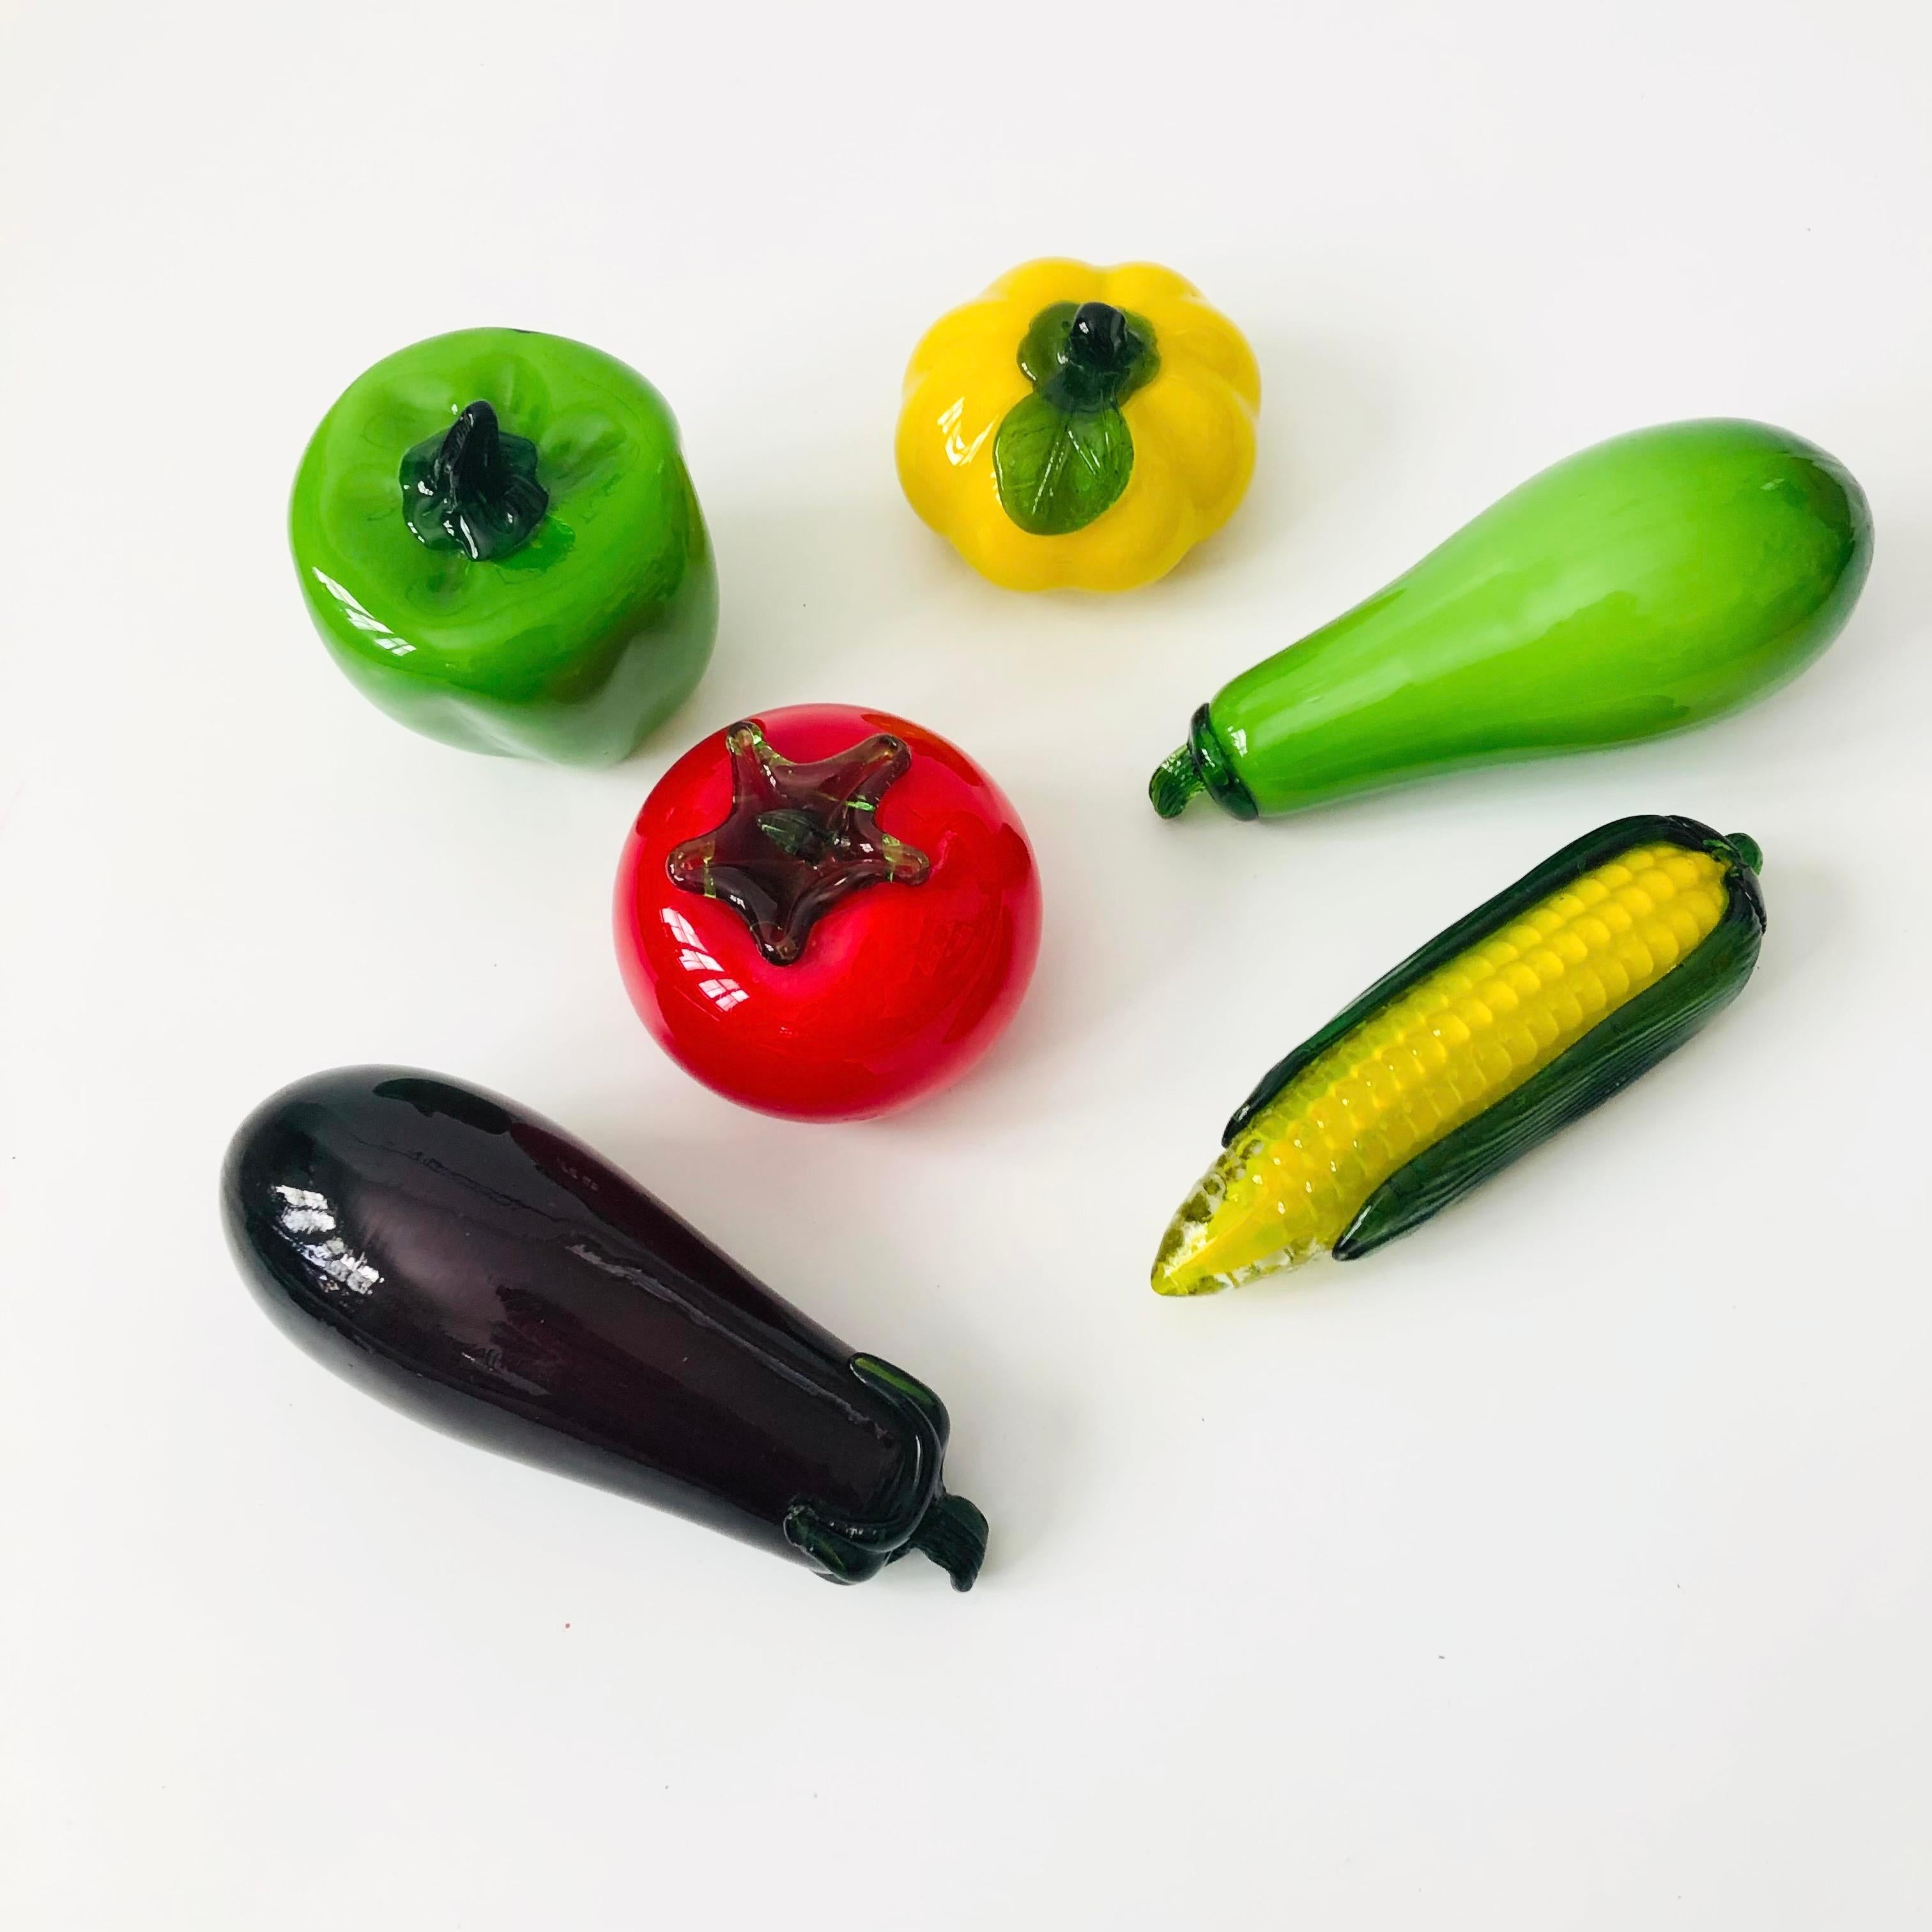 A set of 6 blown art glass vegetables. Vibrant colors to the glass and realistic detailing. The set includes an eggplant, ear of corn, bell pepper, tomato, yellow squash, and a green squash.
Please see pictures for dimensions.